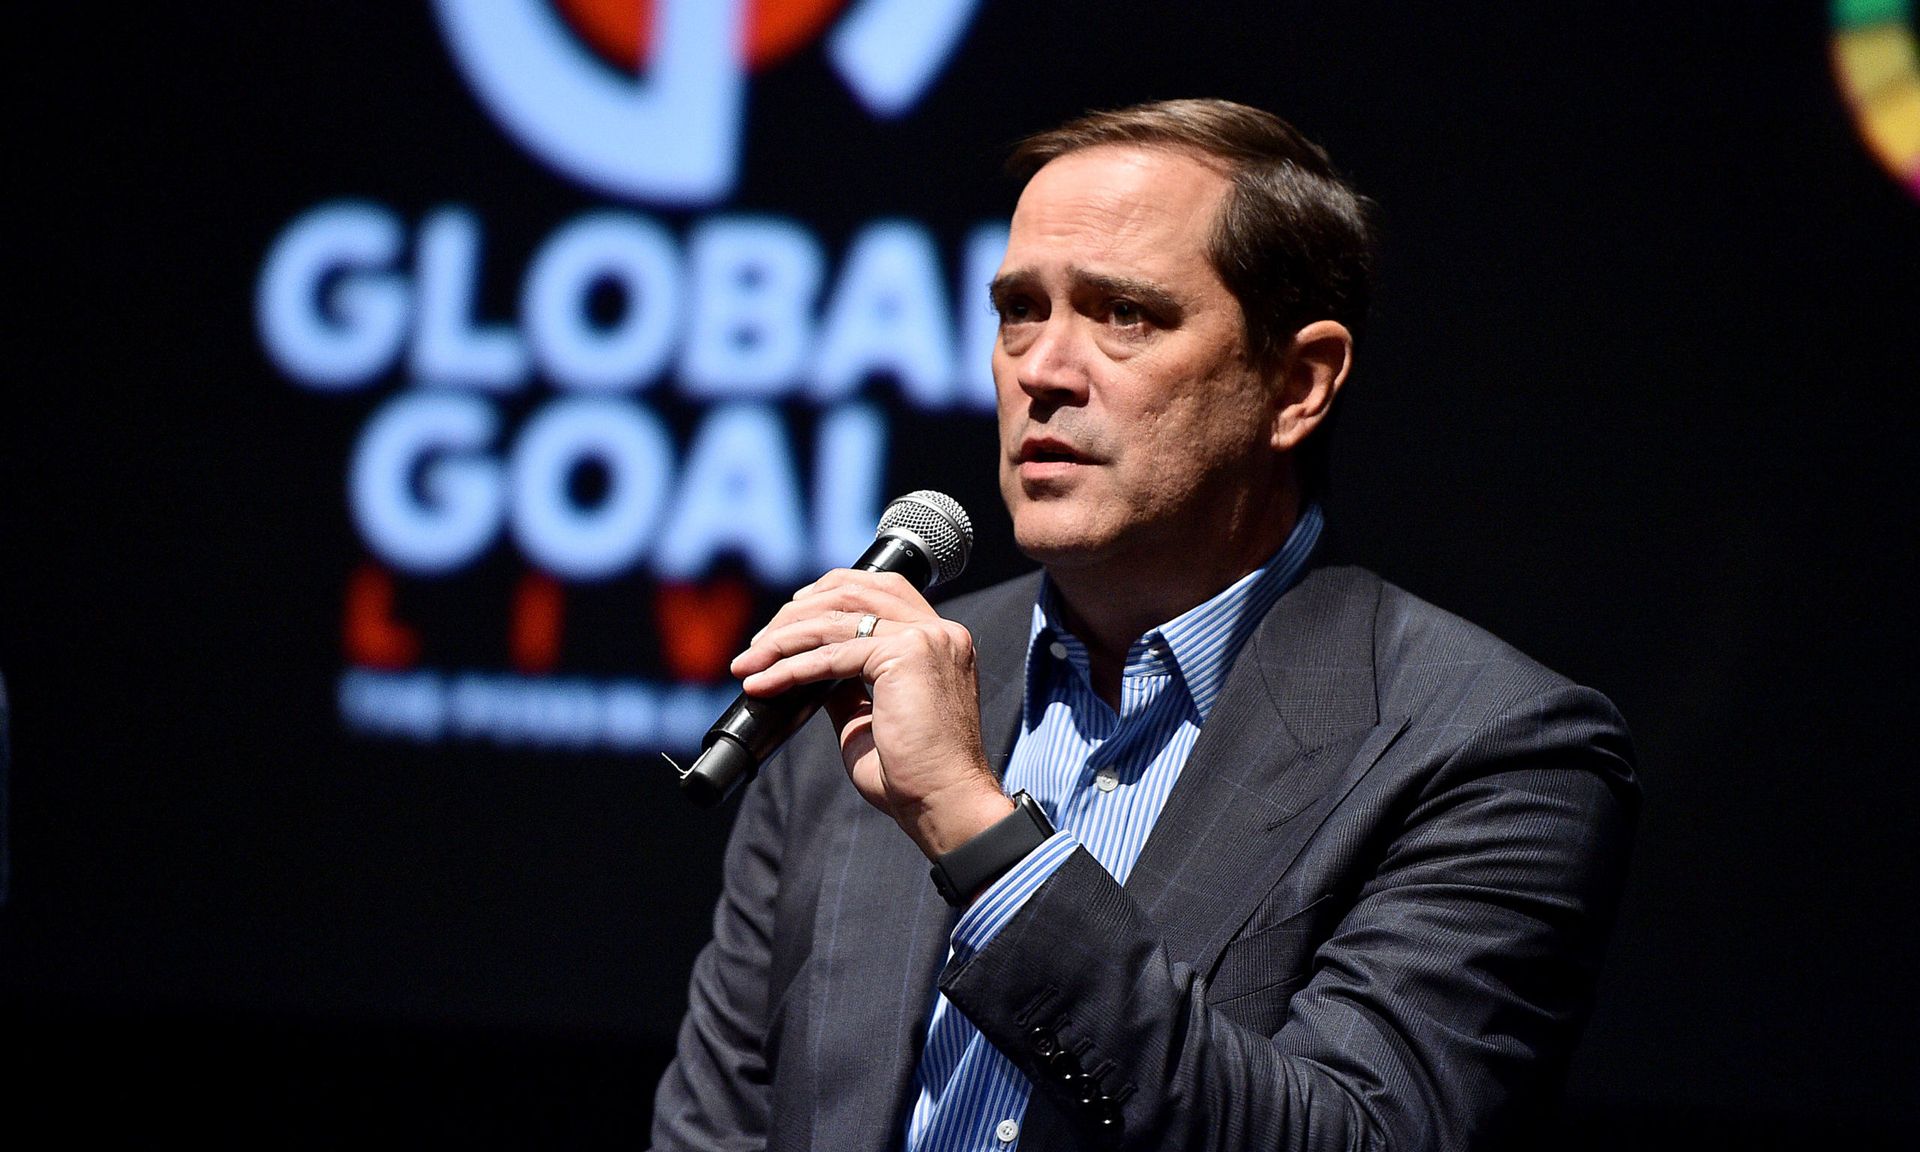 CEO Chuck Robbins speaks onstage September 26, 2019 in New York City. (Photo by Theo Wargo/Getty Images for Global Citizen)